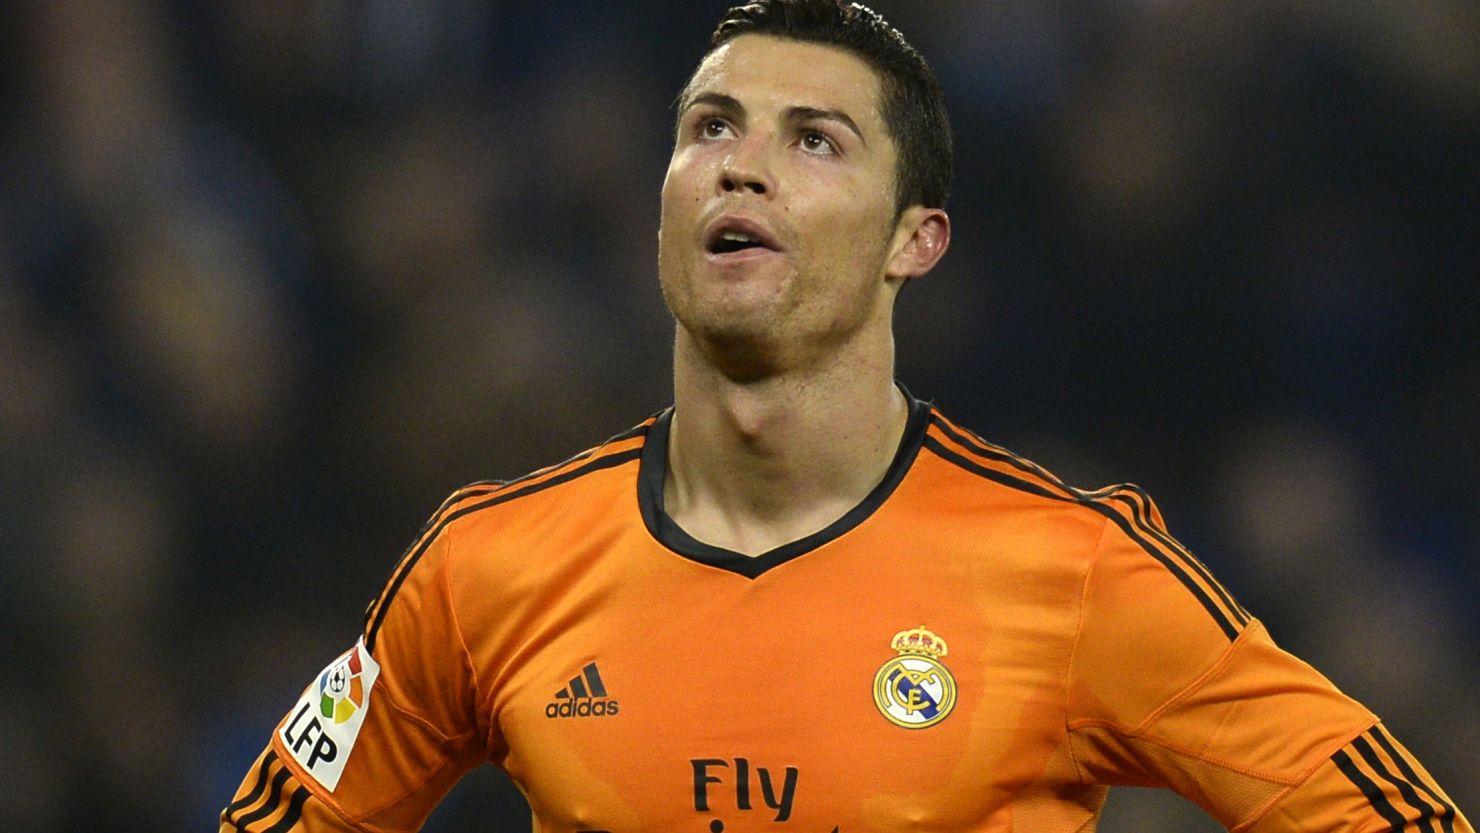 Cristiano Ronaldo has a resigned look after another chance goes begging in Real Madrid's 1-0 win at Espanyol.